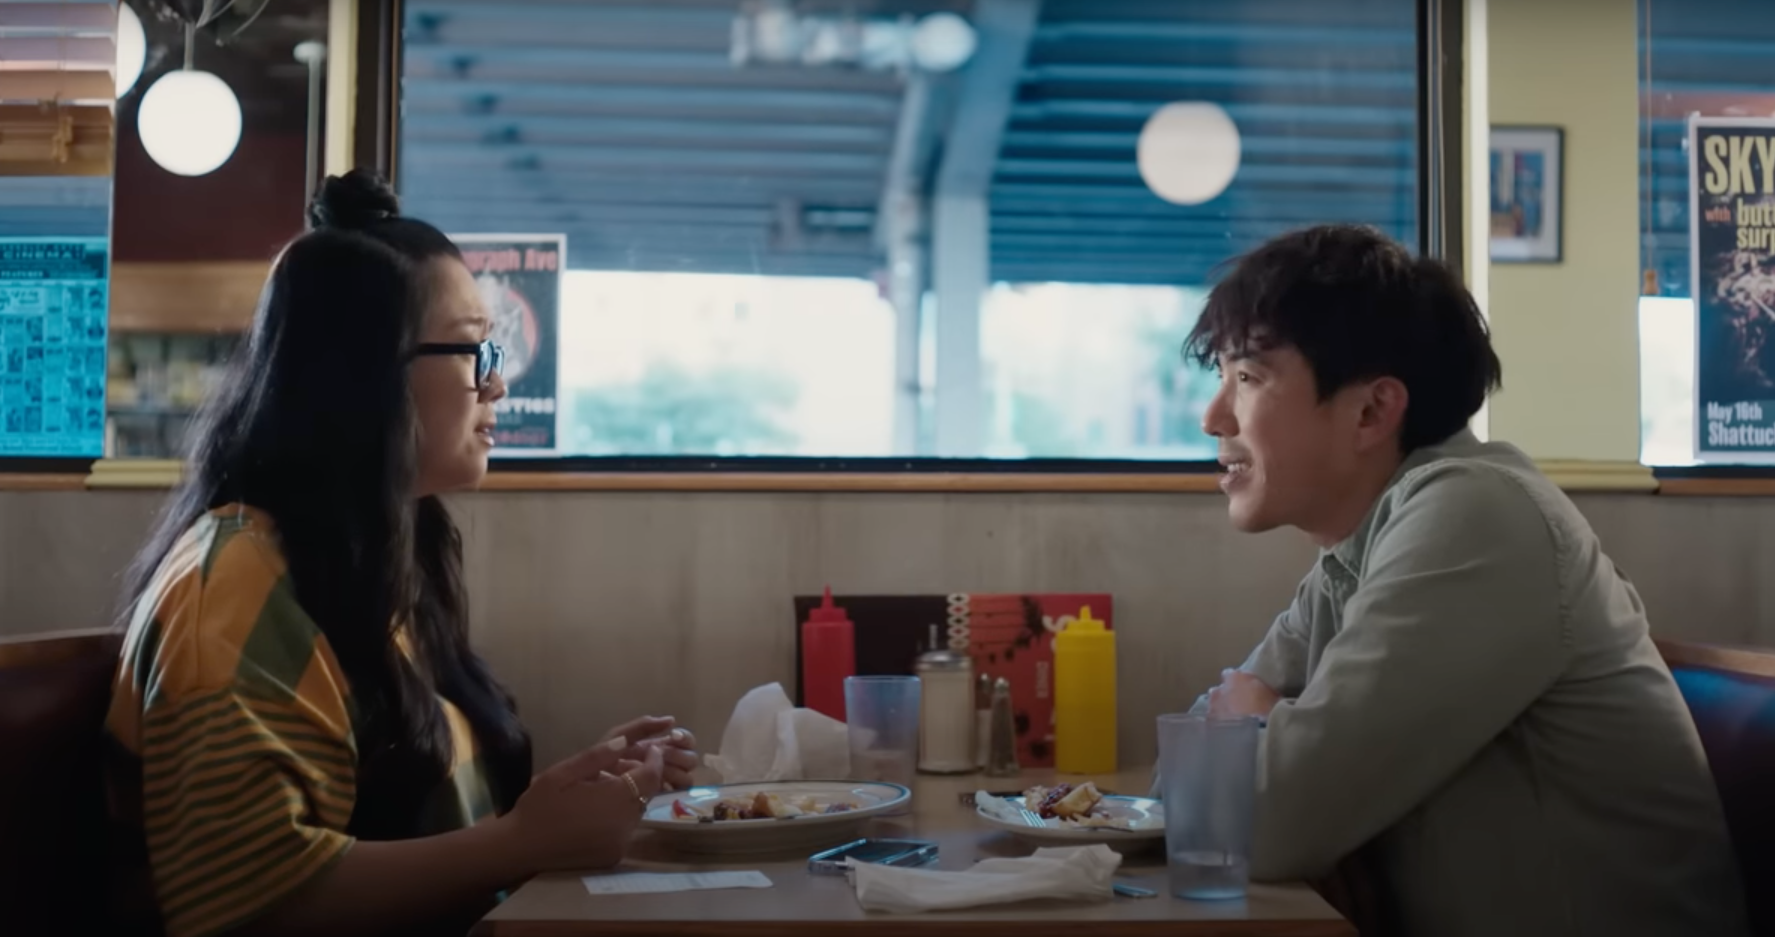 Two people, a man and a woman, sit across from one another at a diner table